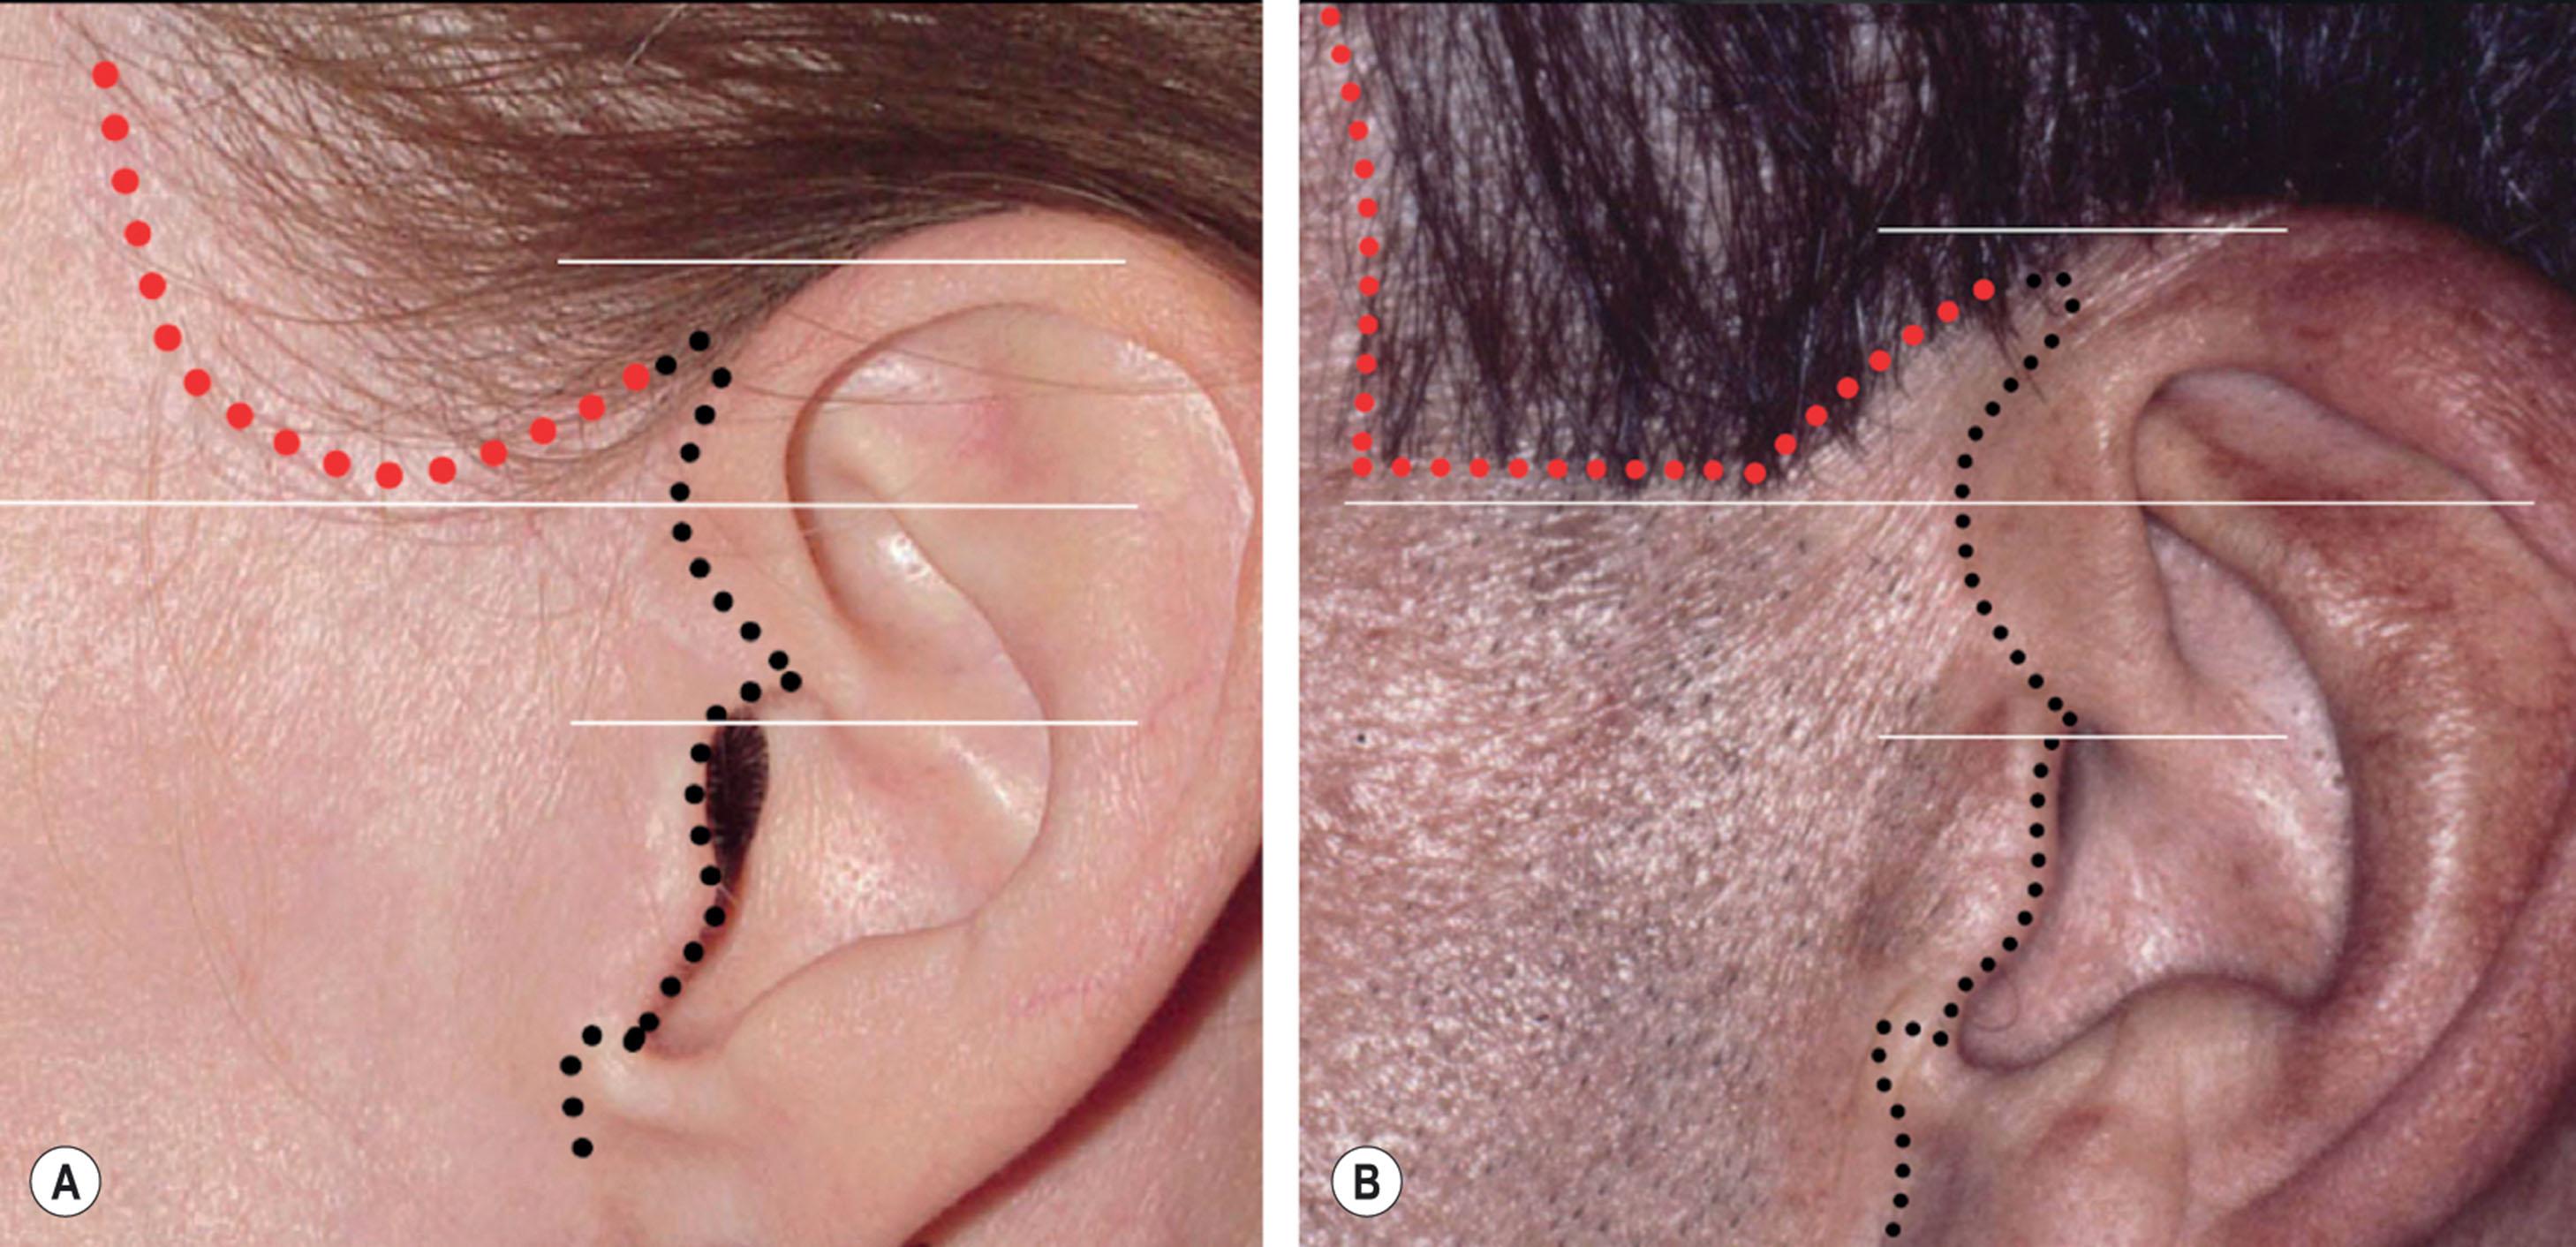 Figure 9.8.10, Plan for incision along the temporal hairline – female vs. male patients. An incision along the temporal hairline should be considered whenever the surgeon’s assessment predicts objectionable superior and posterior displacement of the sideburn and temple hair will occur. This incision plan is usually indicated in older patients and almost always in patients undergoing secondary or tertiary procedures. In certain cases the incision may extend higher or lower than shown depending on the amount of excess skin present in the upper lateral face. (A) Temple hairline incision plan for the female patient (dotted red line). Note that incision is planned as a soft curve to evoke a feminine appearance extending inferiorly to a point approximately half the height of the anterior helix (solid white lines). (B) Temple hairline incision plan for the male patient (dotted red line). Note that incision is planned with a more rectangular masculine shape extending inferiorly to a point approximately half the height of the anterior helix (solid white lines). Dotted black lines show typical position of pre-auricular incisions. (An incision plan that sets the male sideburn more inferiorly than shown may compromise the blood supply to the prehelical part of the facelift skin flap. Such a plan also requires the patient to wear a long sideburn from their surgery date forward if the scar is to not show.)